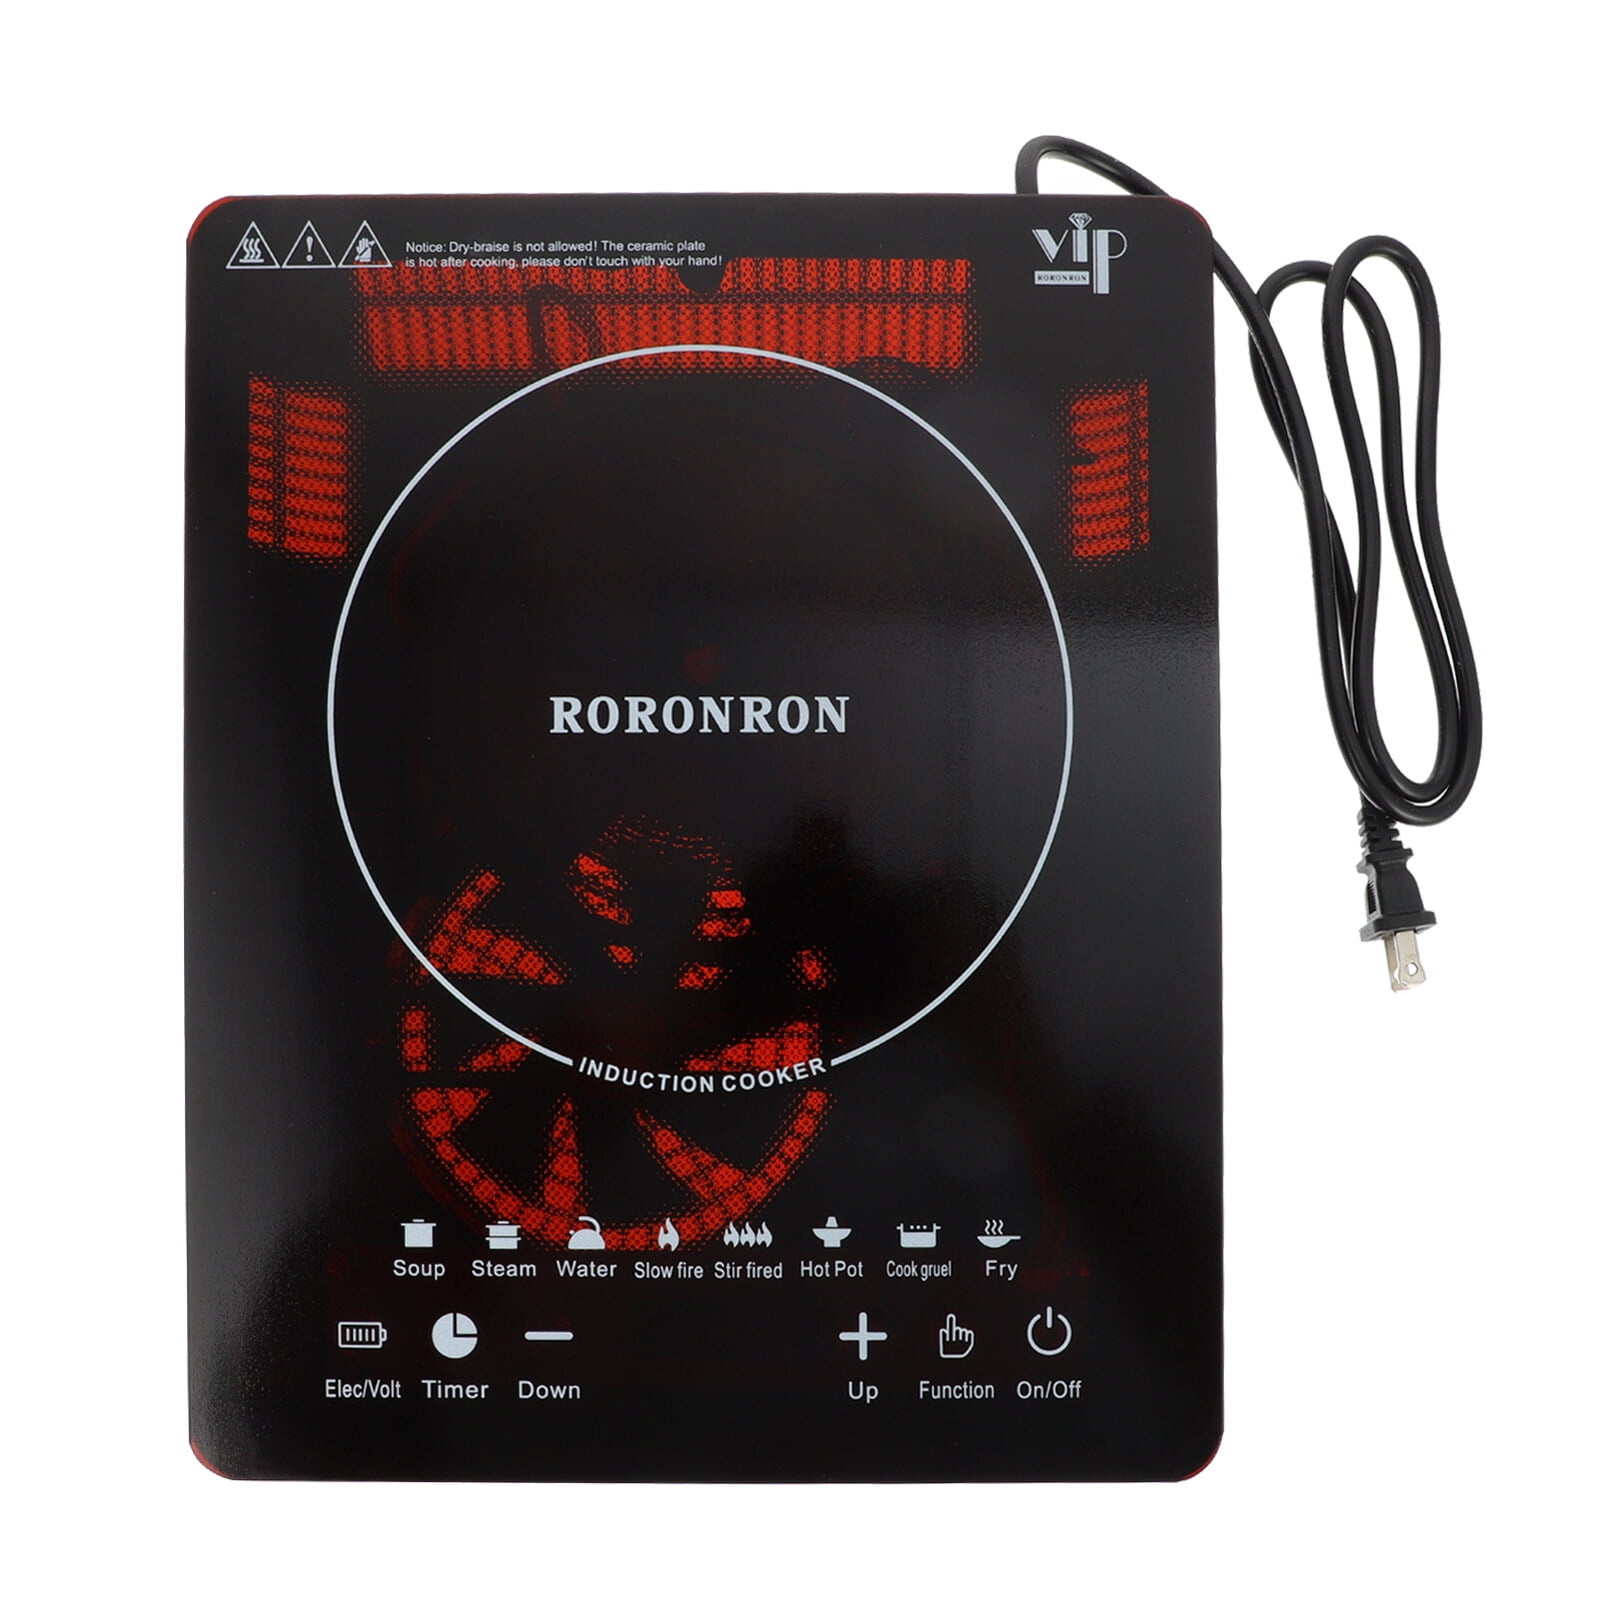 Duxtop Portable Induction Cooktop, Countertop Burner Induction Hot Plate  with LCD Sensor Touch 1800 Watts, Black 9610LS BT-200DZ